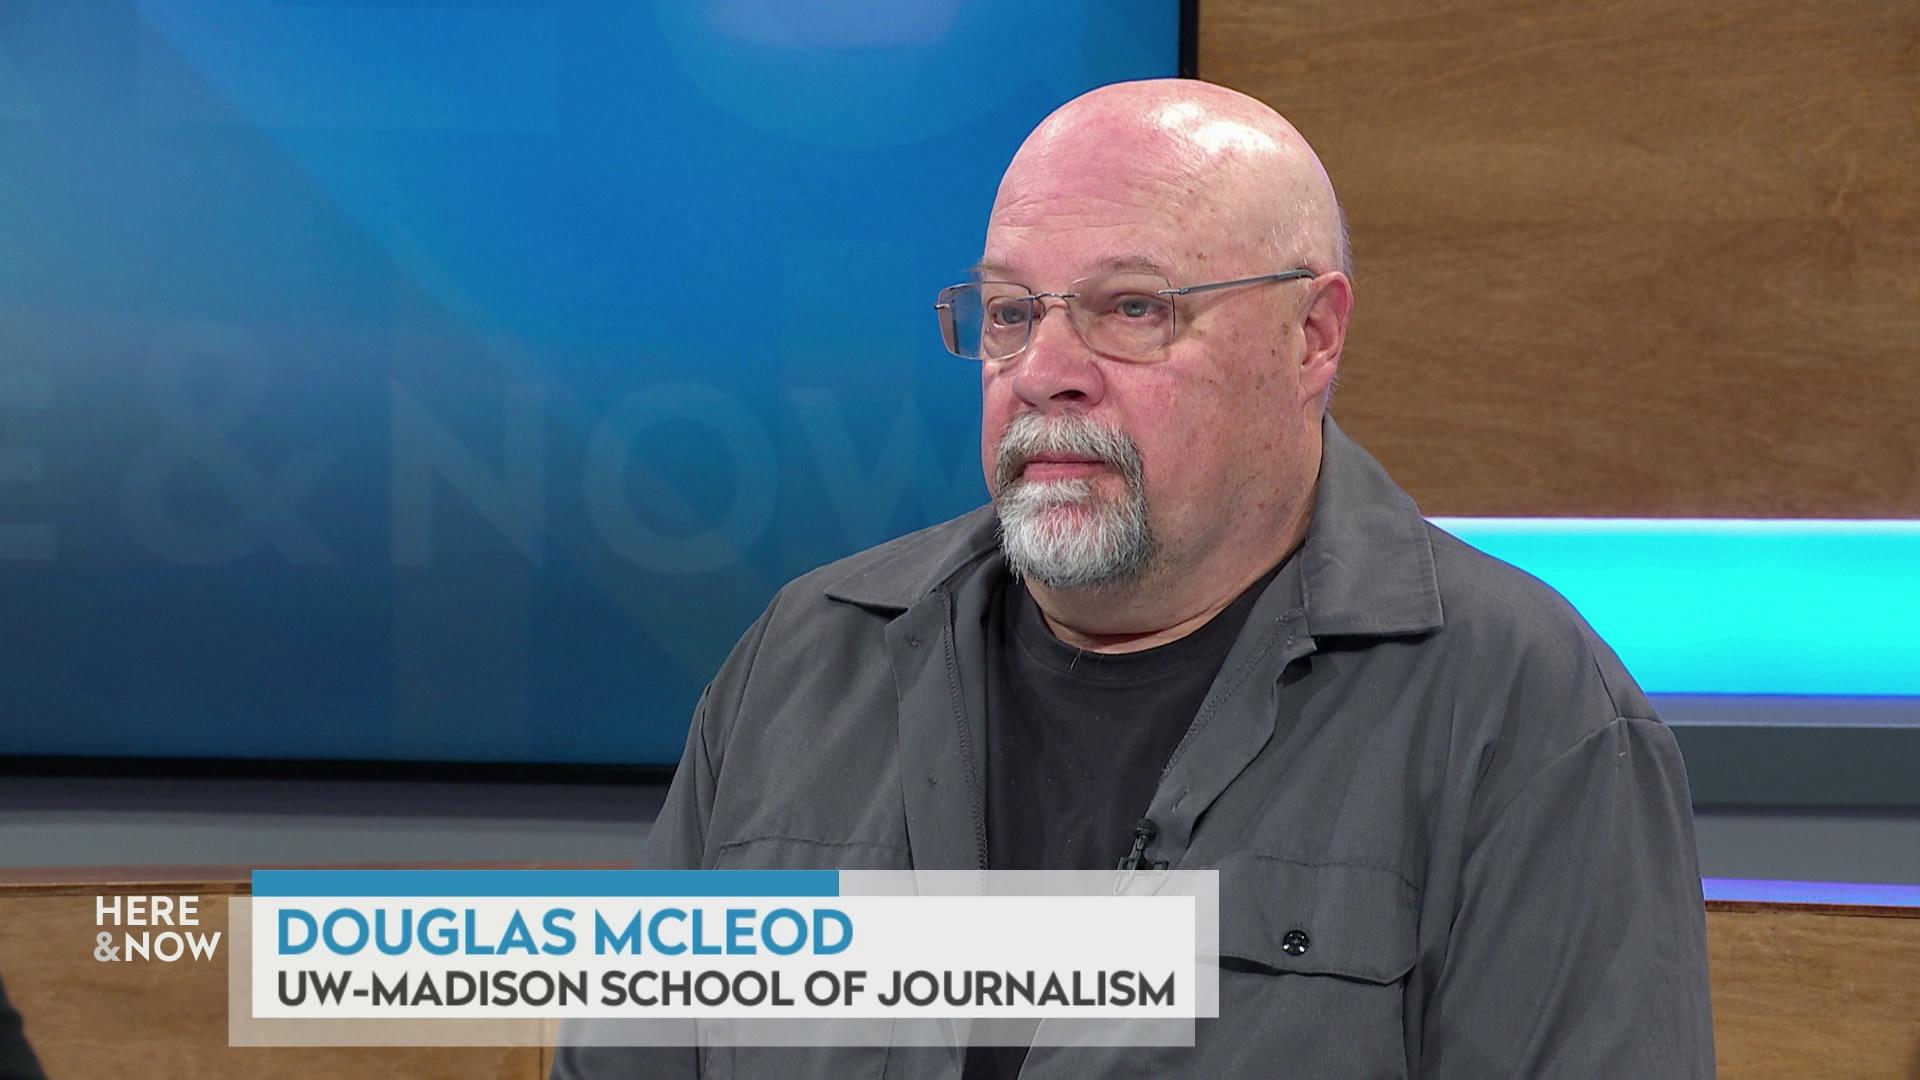 A still image shows Douglas McLeod seated at the 'Here & Now' set featuring wood paneling, with a graphic at bottom reading 'Douglas McLeod' and 'UW-Madison School of Journalism.'